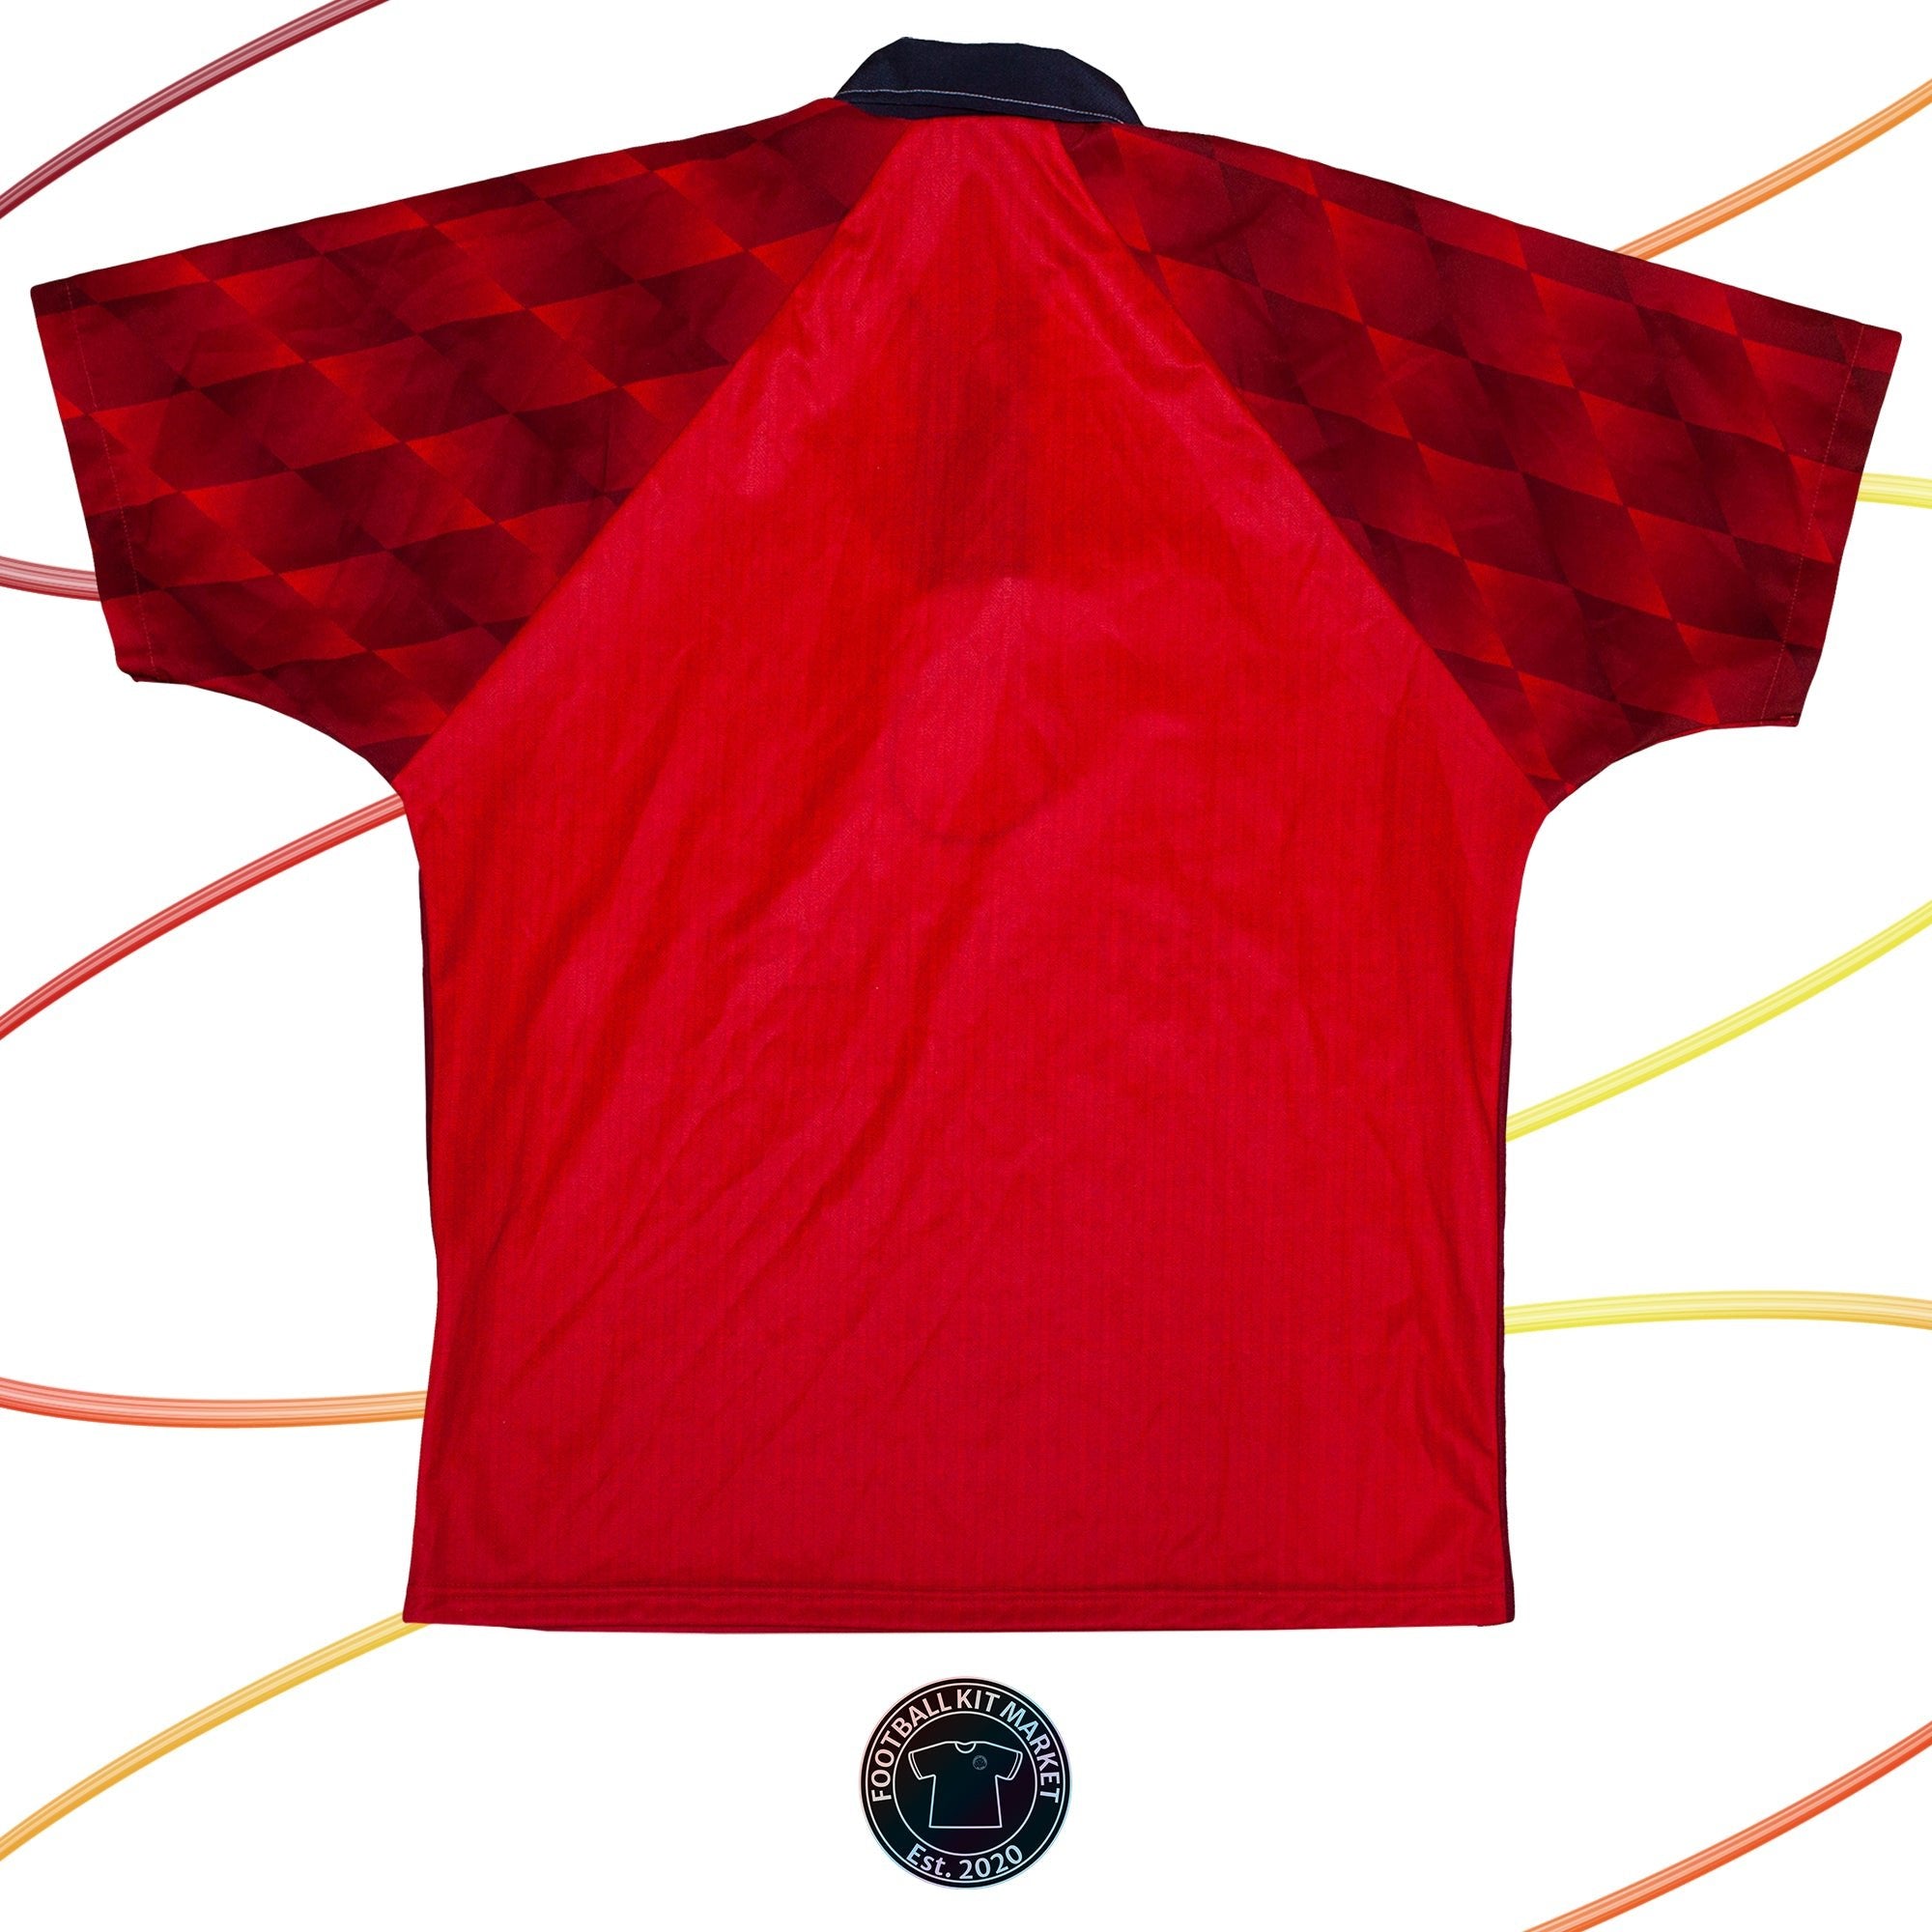 Genuine MANCHESTER UNITED Home Shirt (1996-1998) - UMBRO (L) - Product Image from Football Kit Market